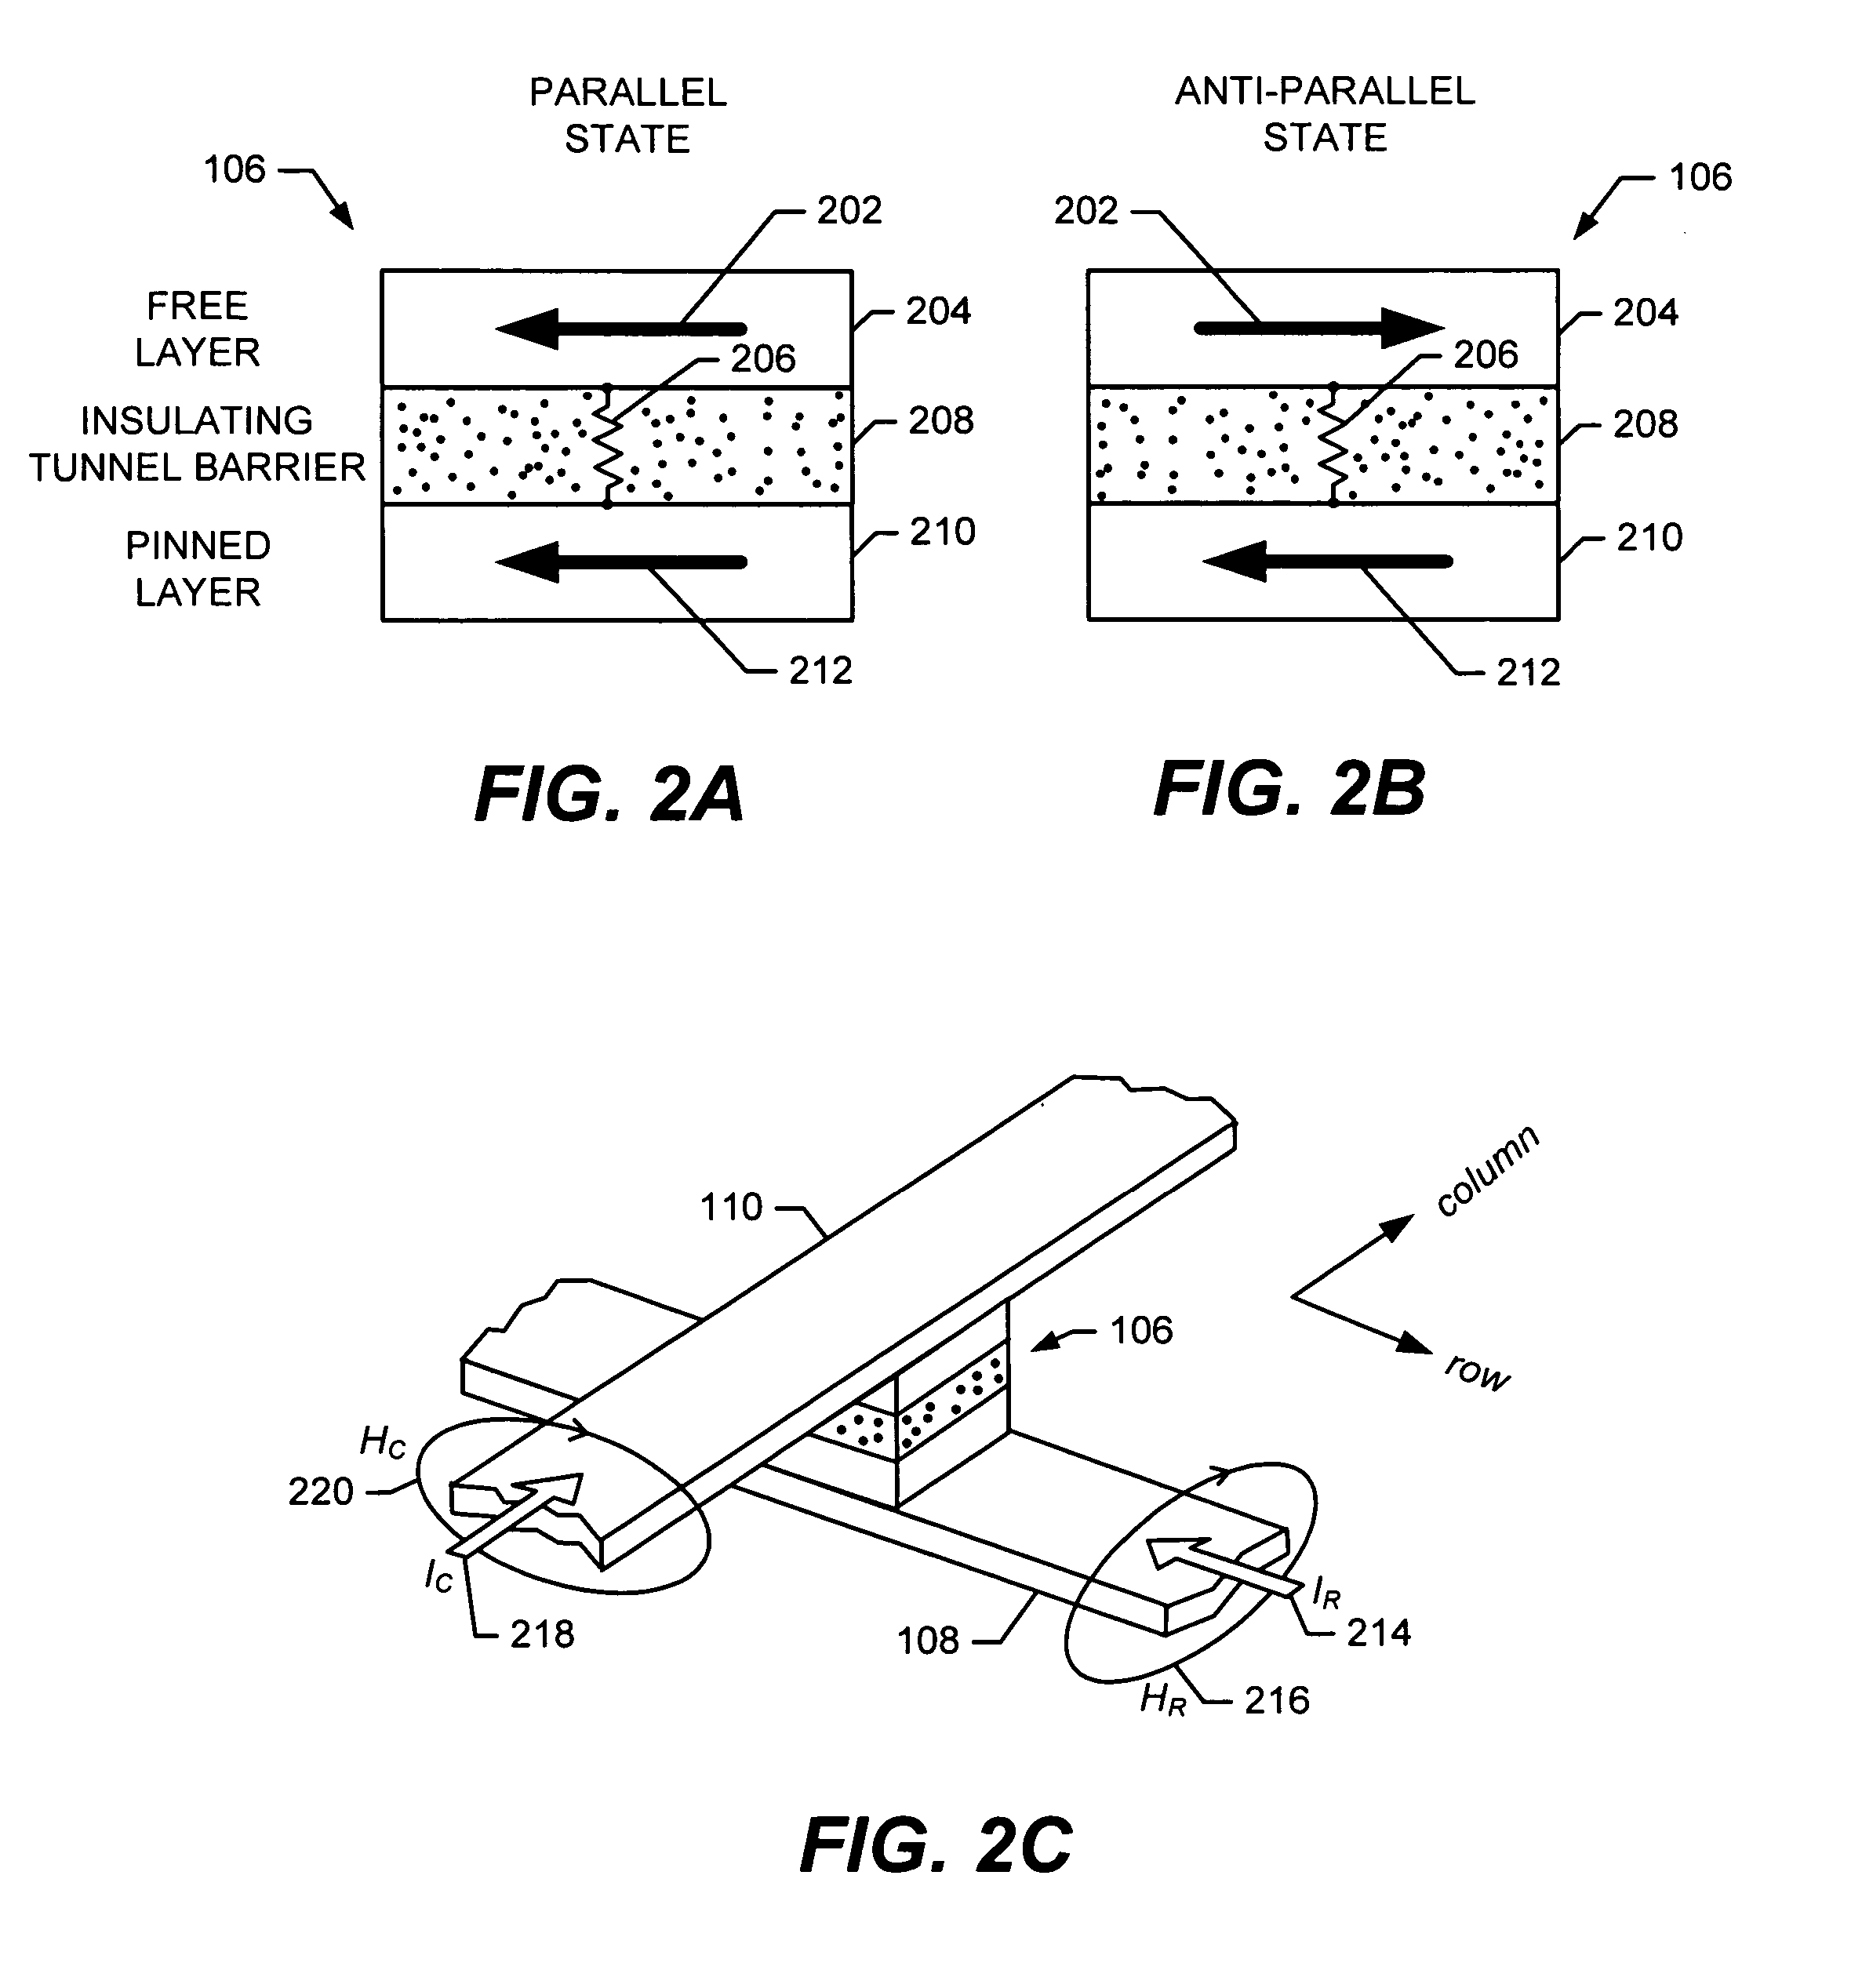 Method and apparatus for a sense amplifier